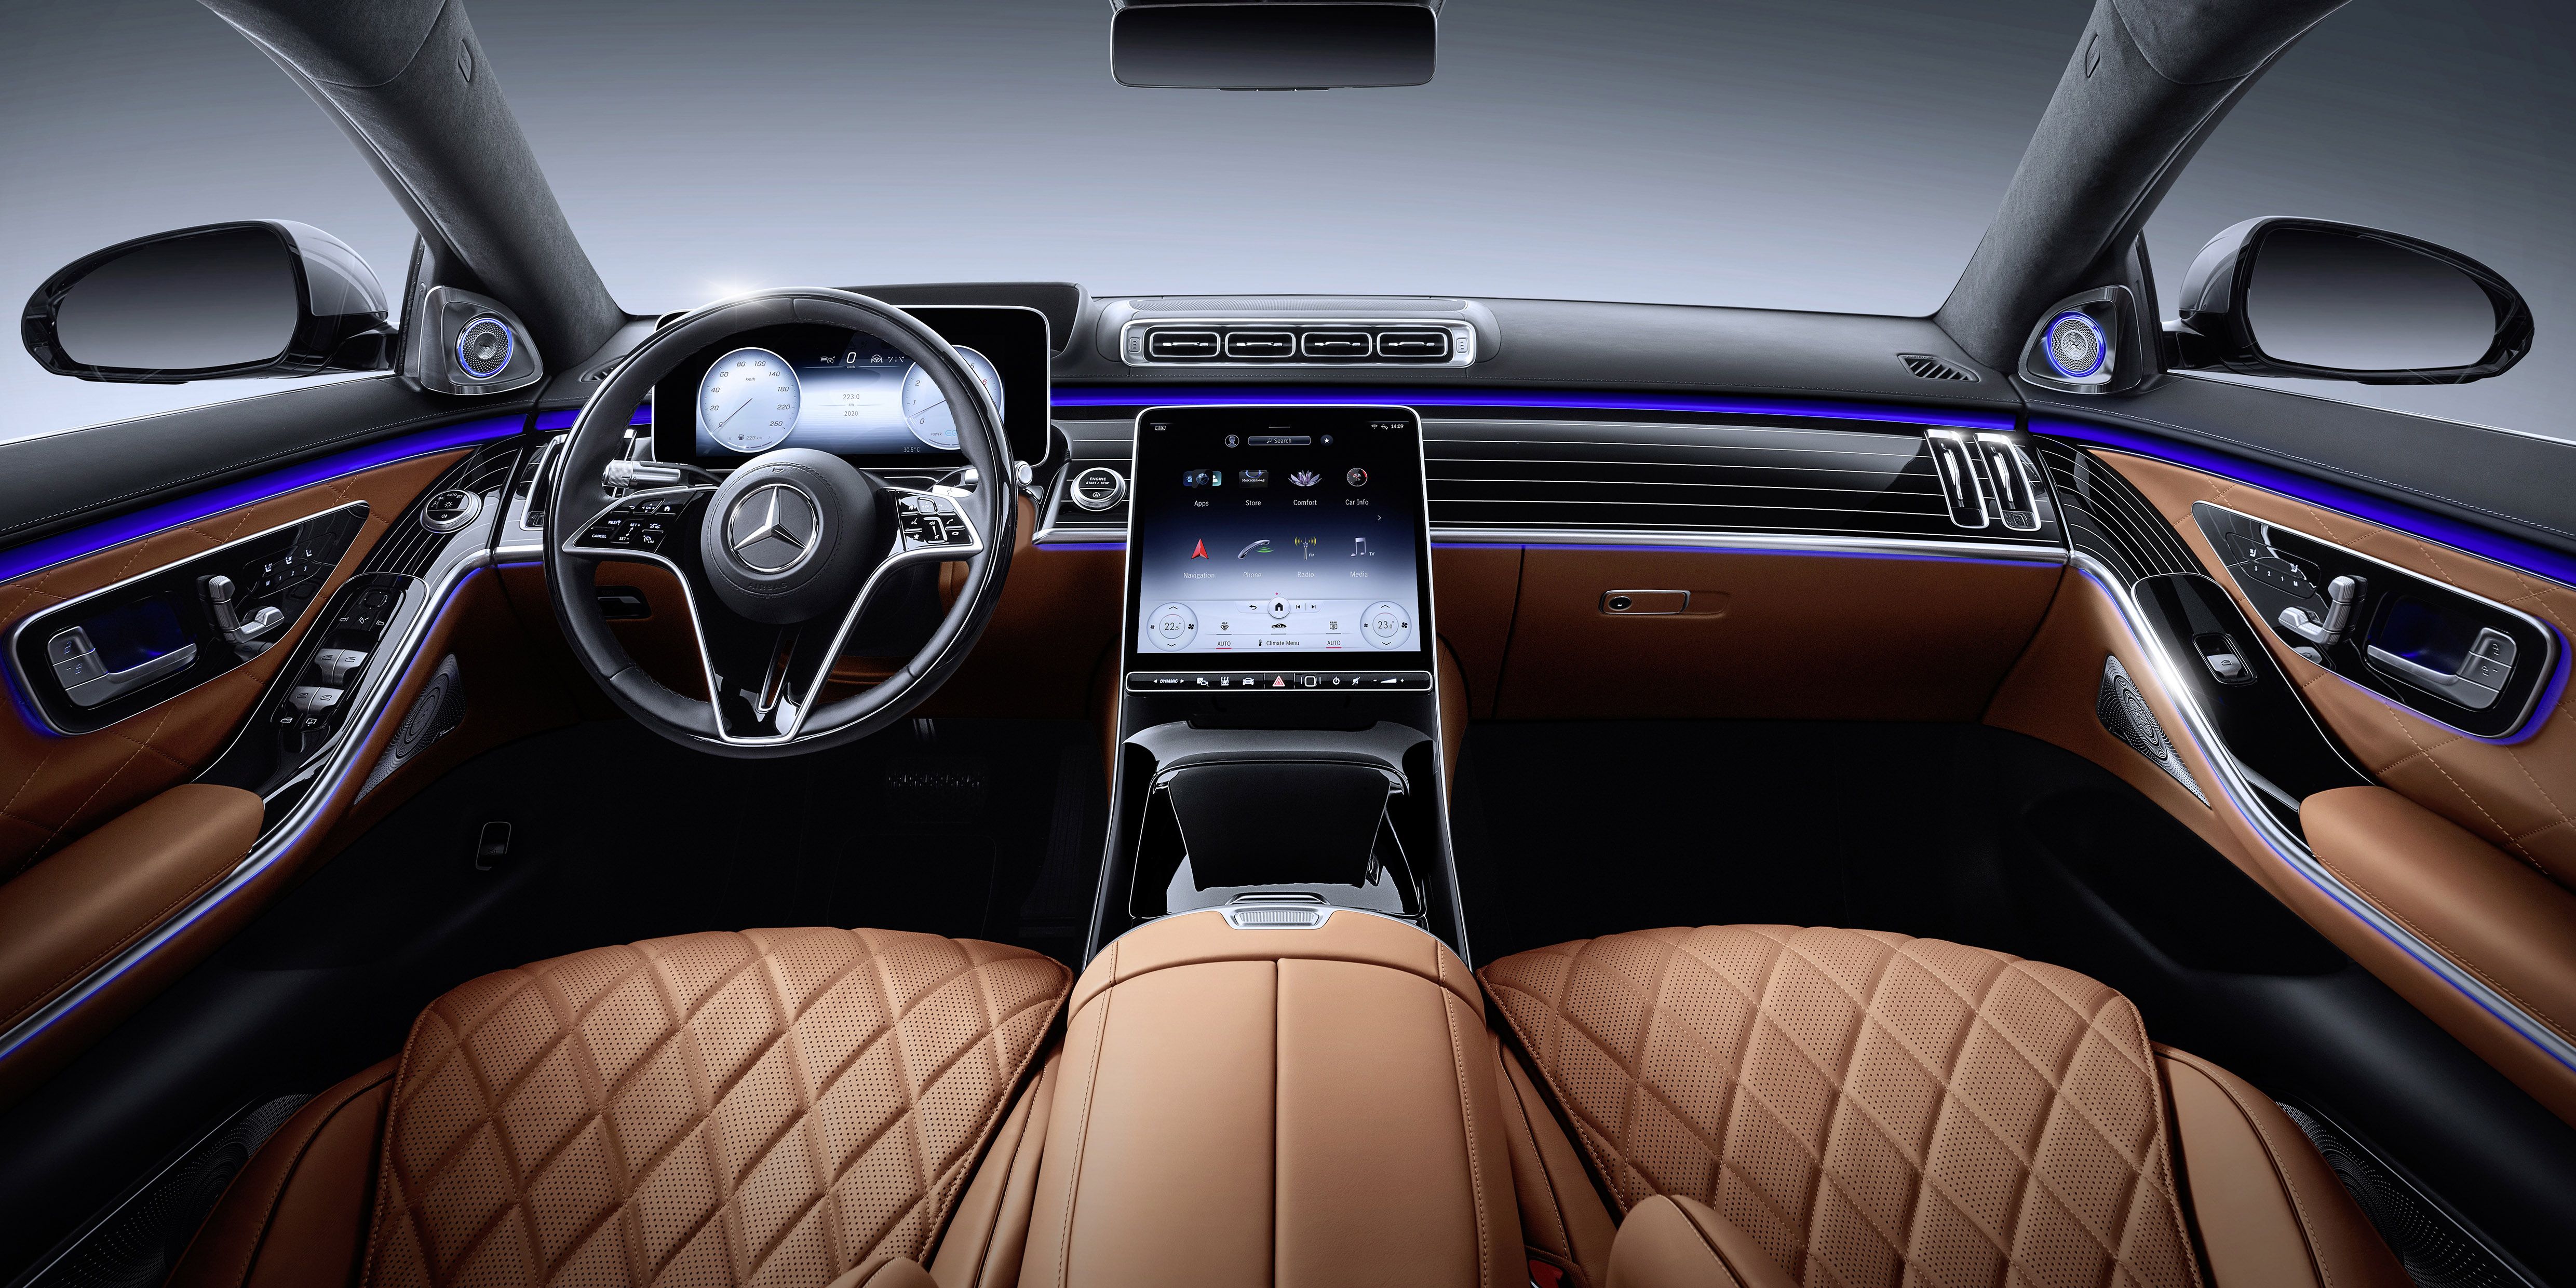 Here is the 2021 S-Class Interior